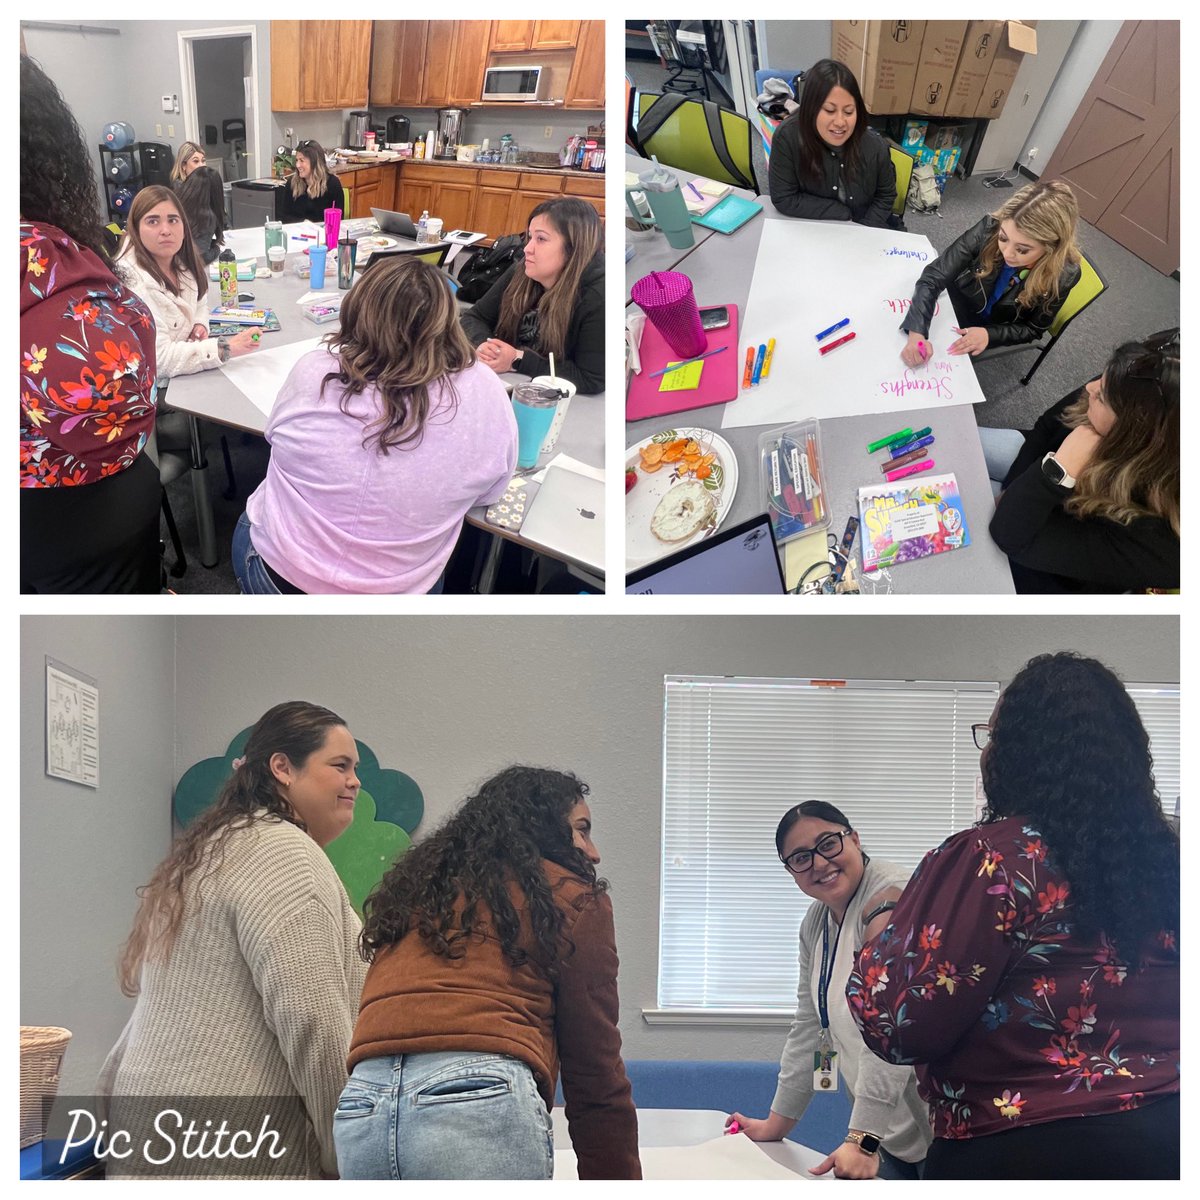 Our school counselors are leveling up their skills! Under Melissa’s guidance, our counselors are not just getting trained; they’re becoming champions of navigating the complexities of student needs to provide the best possible support. ✨Thank you Yolanda for all your help today.